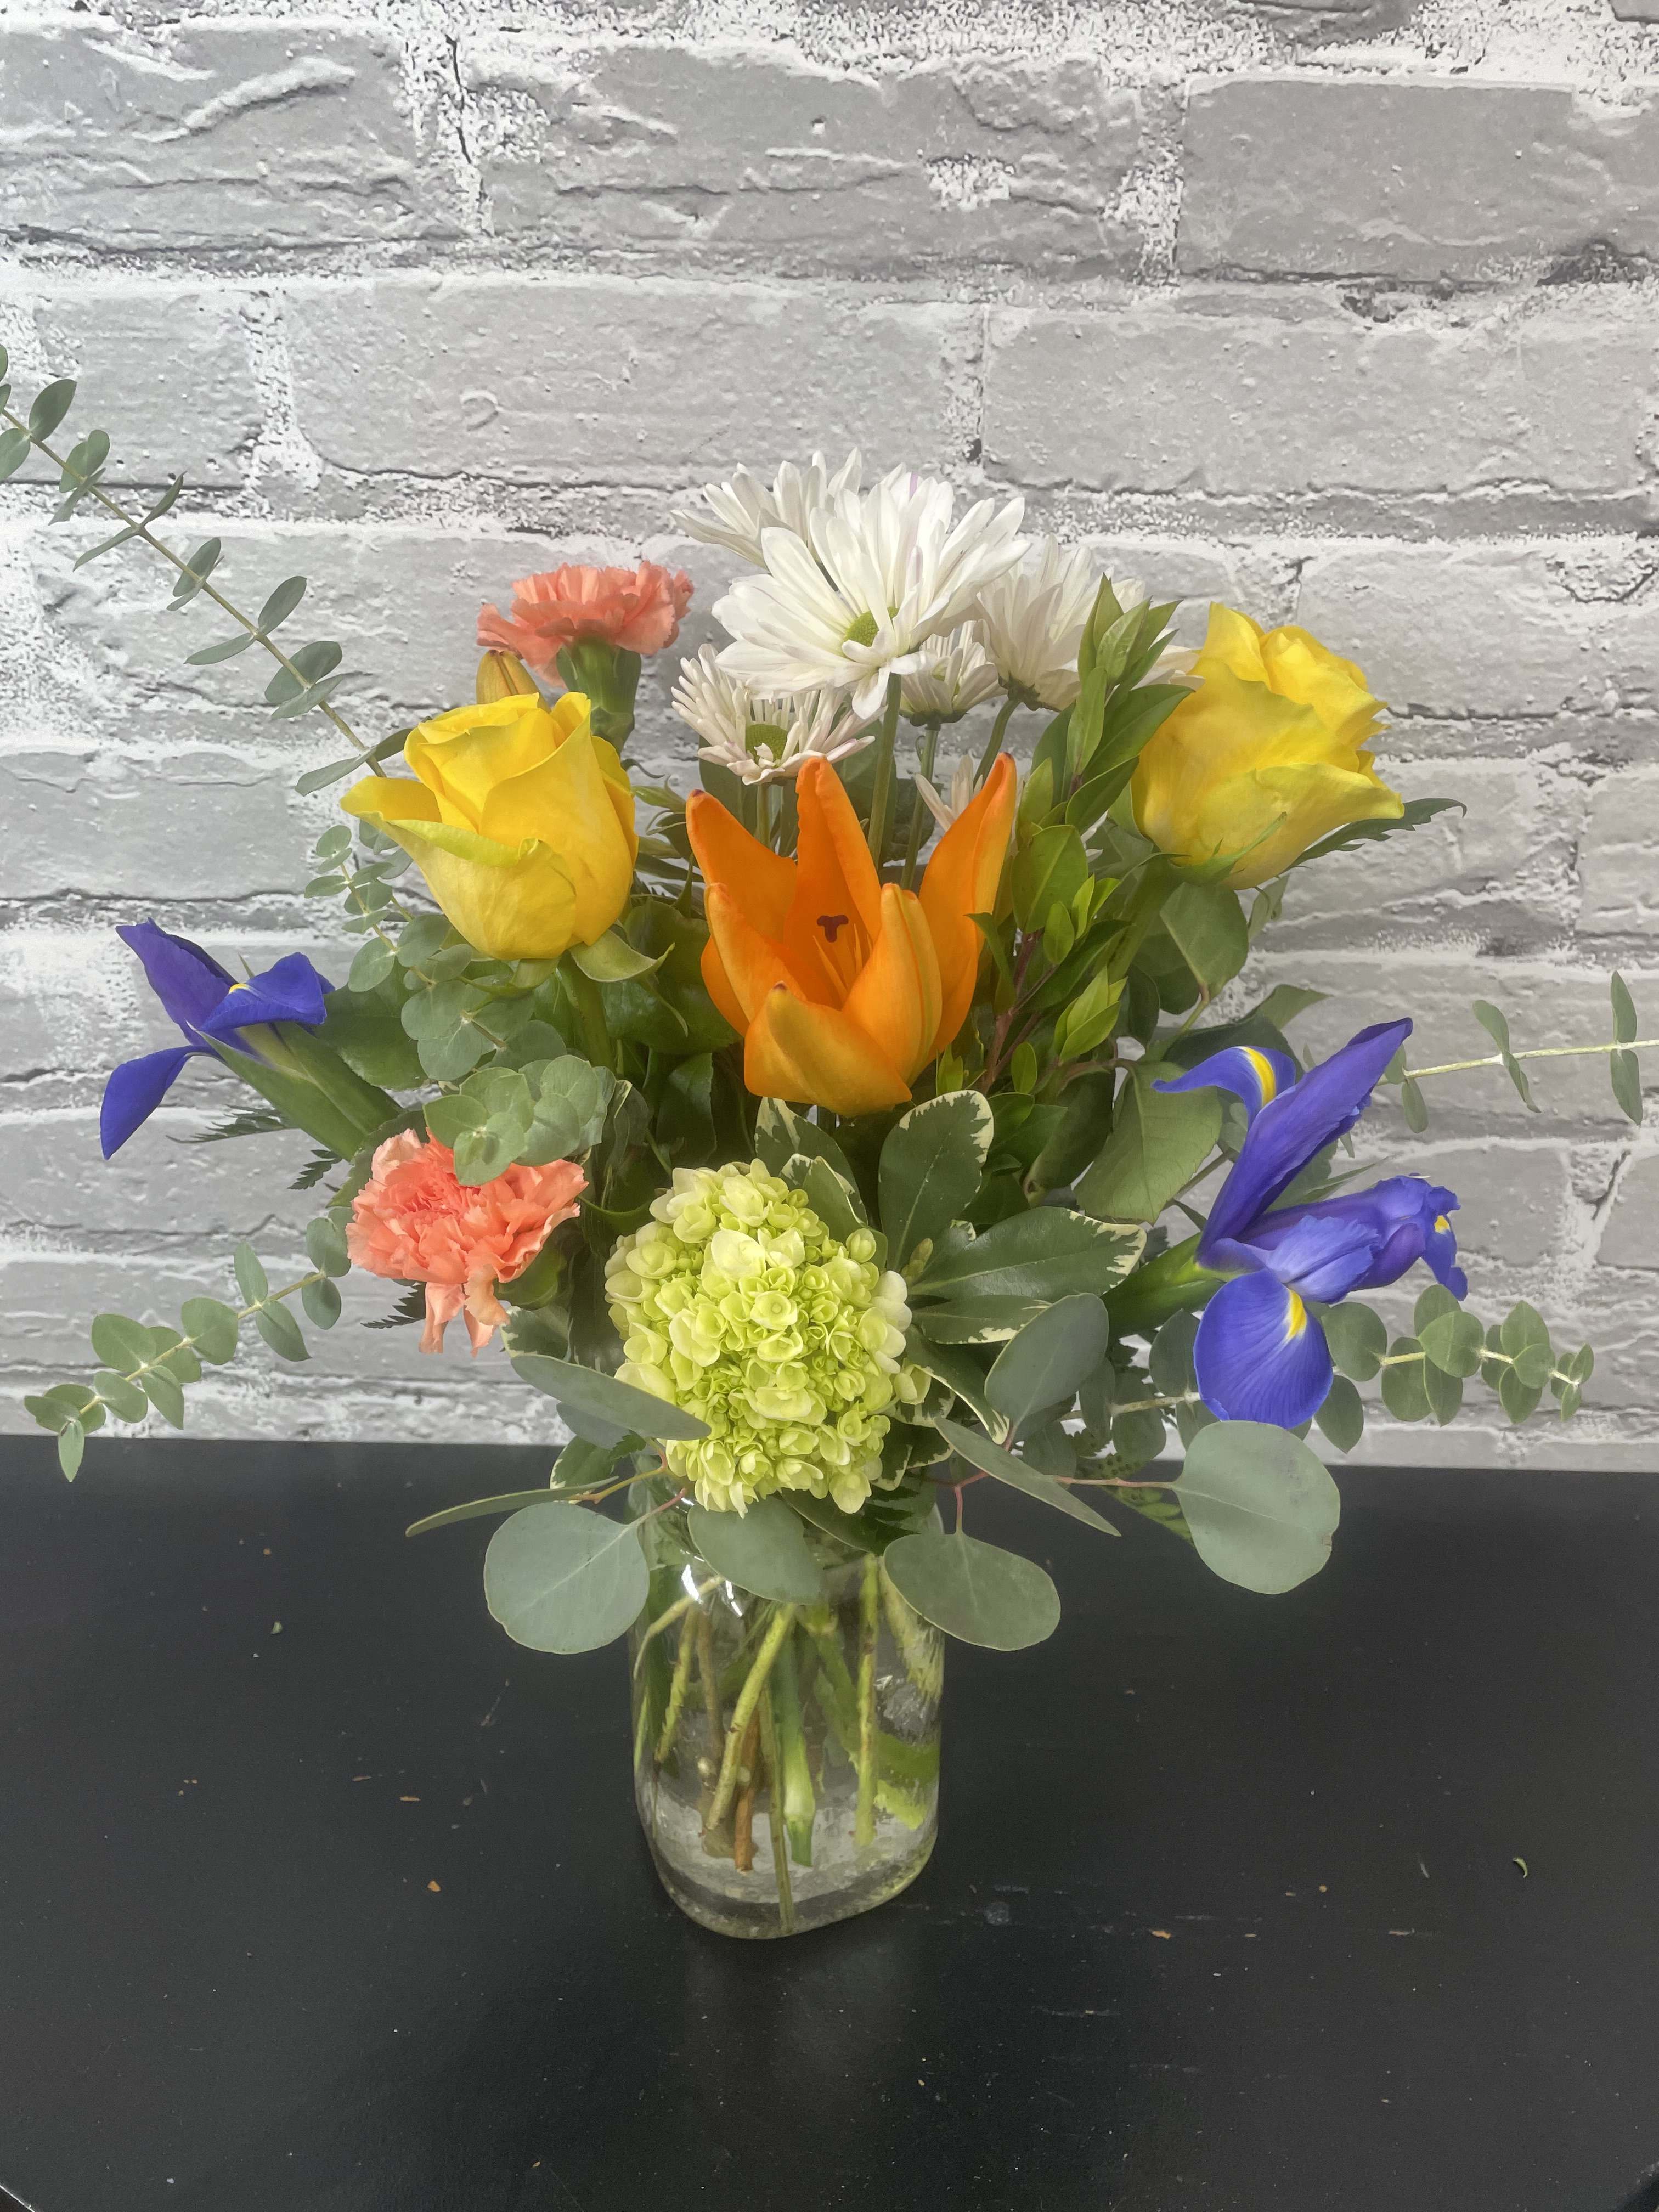 Harmony - Fun combination of orange lilies, yellow roses, iris, combine with daisies,  hydrangea, and eucalyptus to create this bouquet.